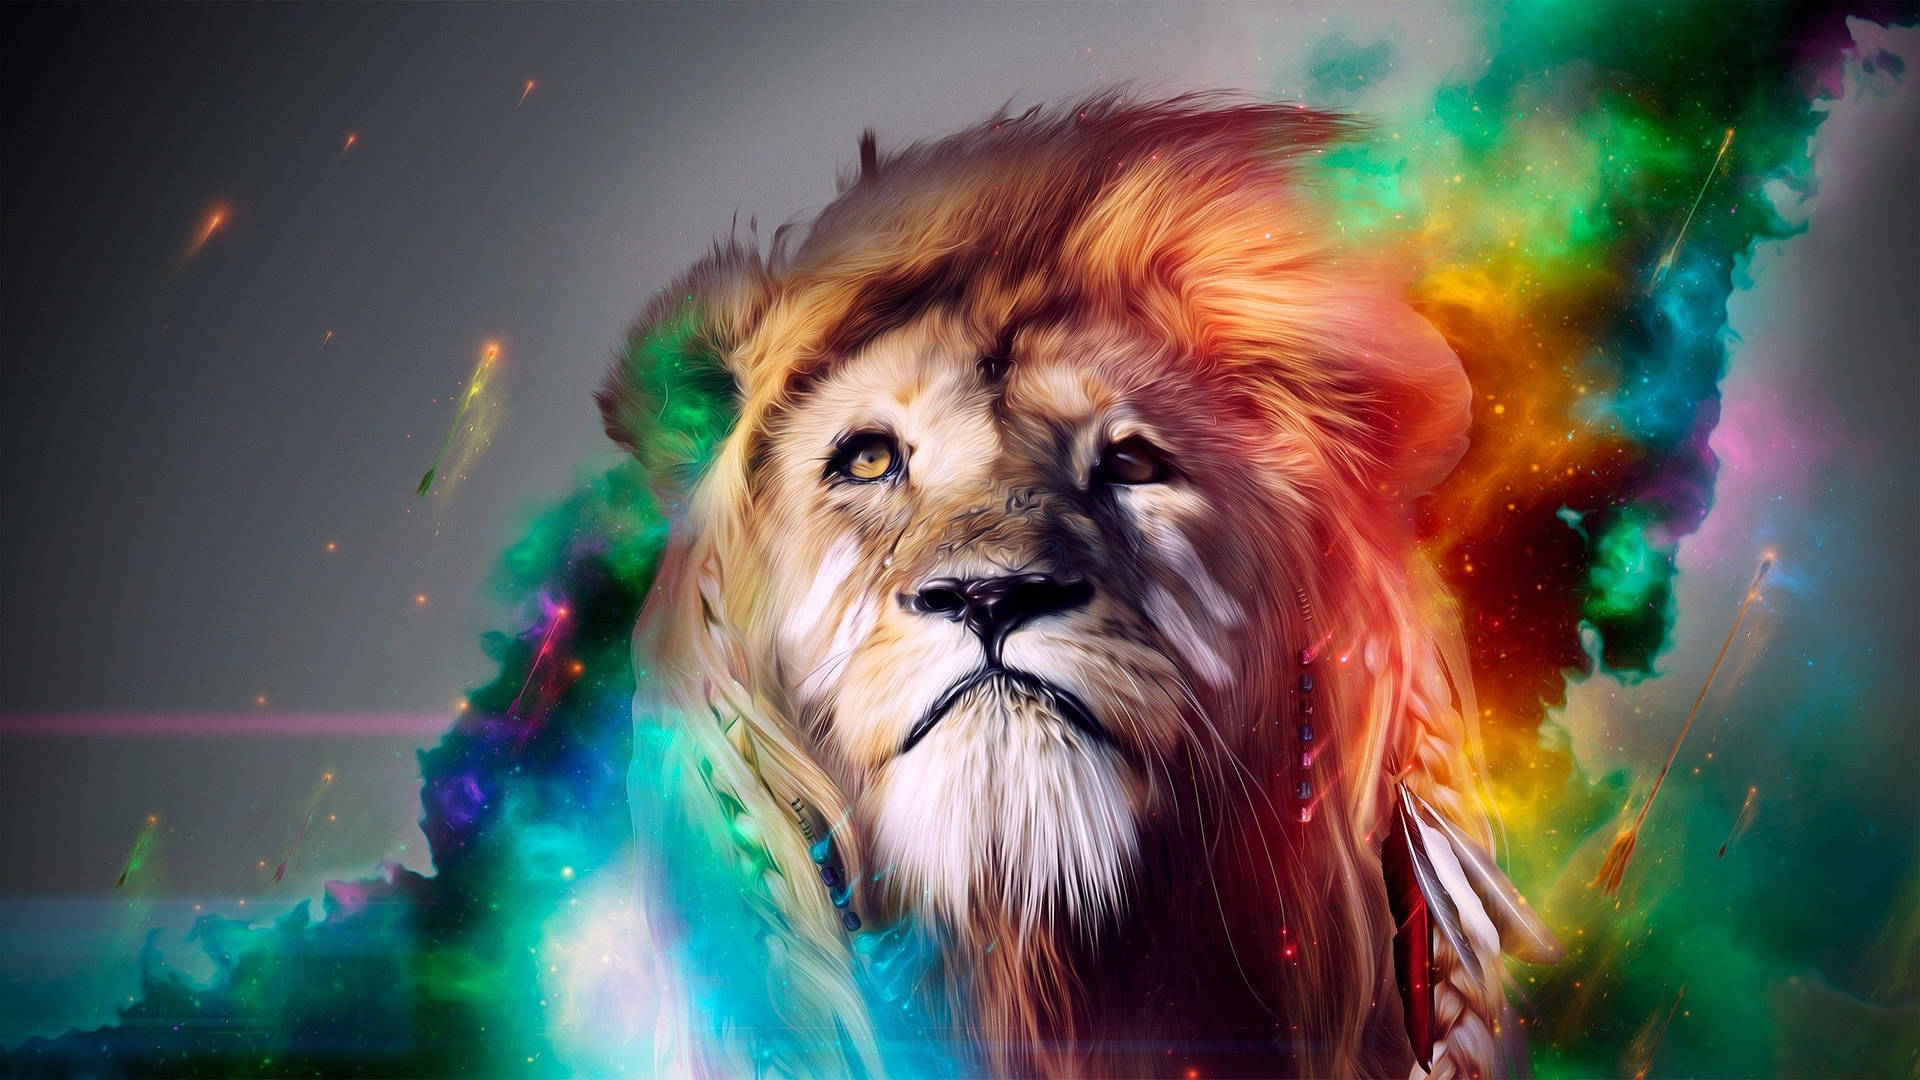 Free Cool Lion Wallpaper Downloads, [100+] Cool Lion Wallpapers for FREE |  